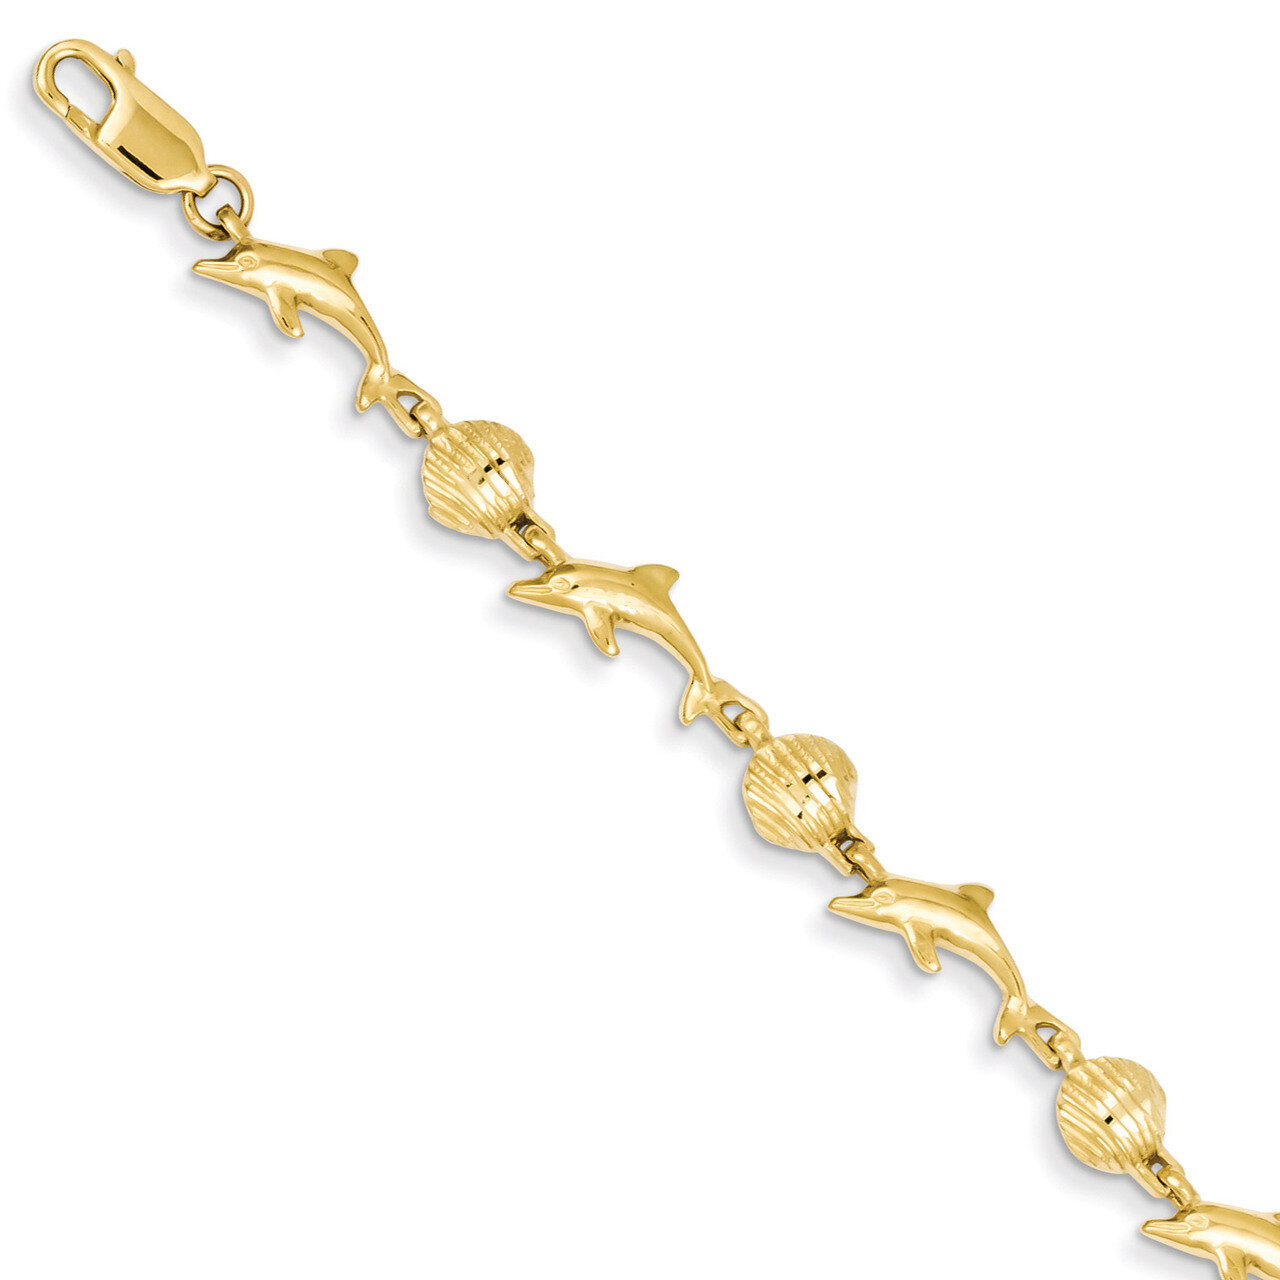 Dolphin and Shell Bracelet 7 Inch 14k Gold FB1246-7